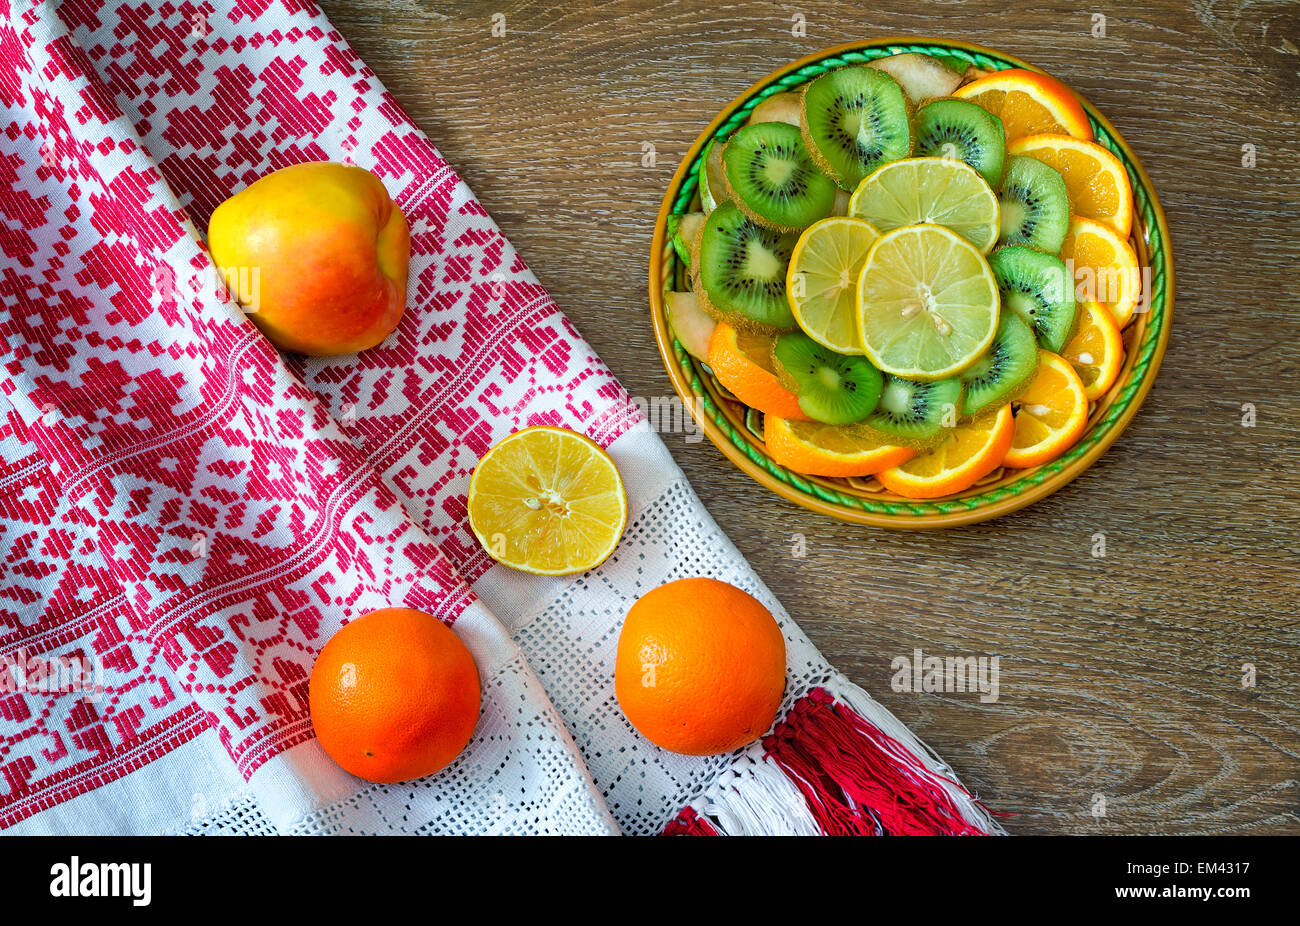 On the table is a dish of sliced fruits: oranges, kiwi, lemon. Near them on a beautiful towel are two oranges and an Apple. Stock Photo